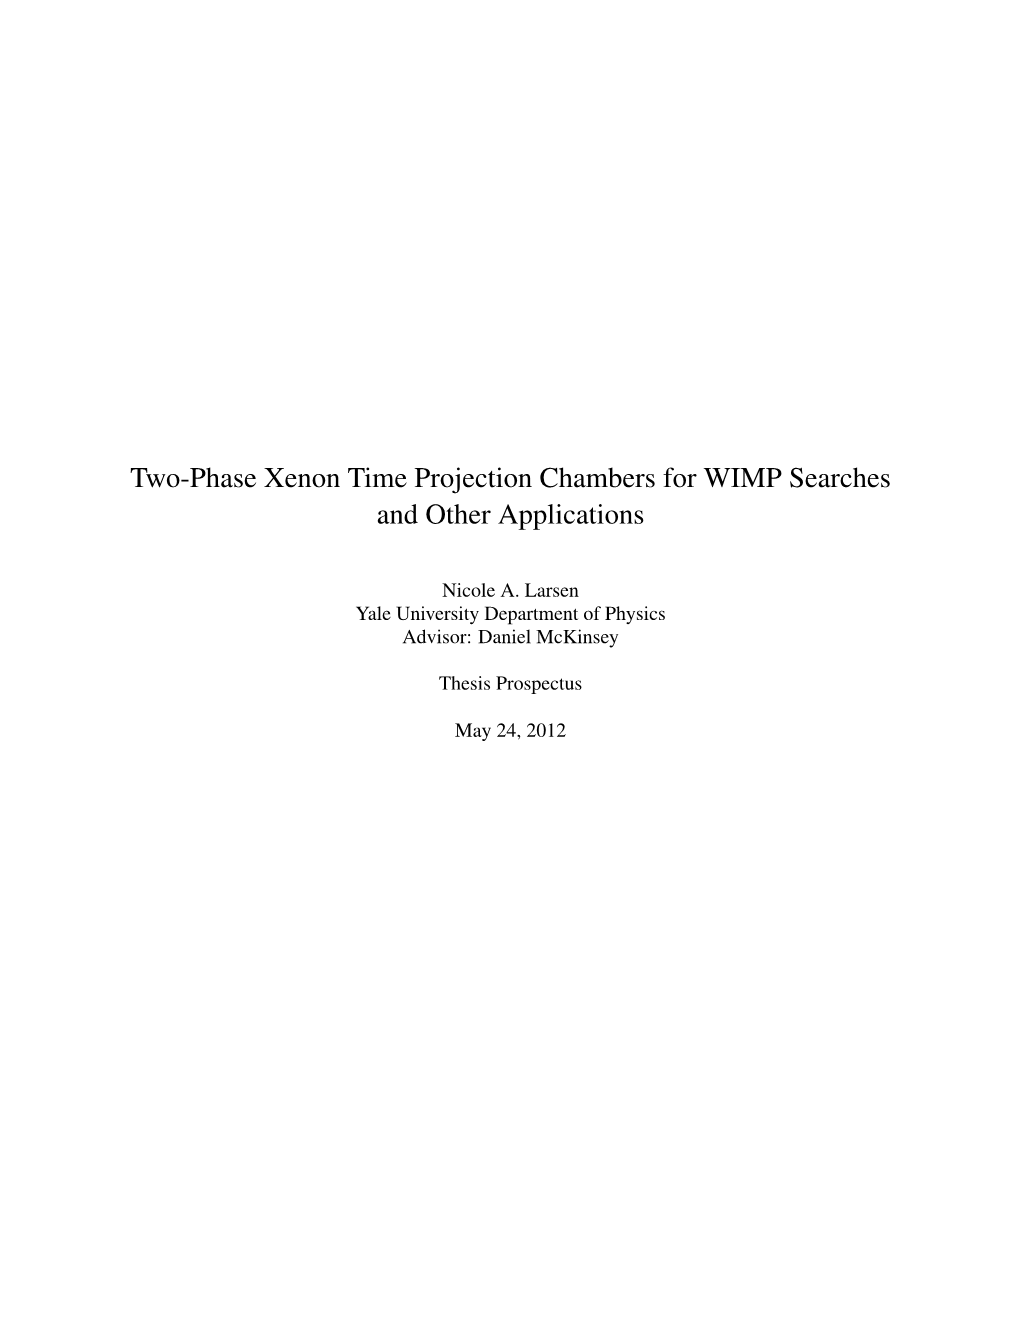 Two-Phase Xenon Time Projection Chambers for WIMP Searches and Other Applications